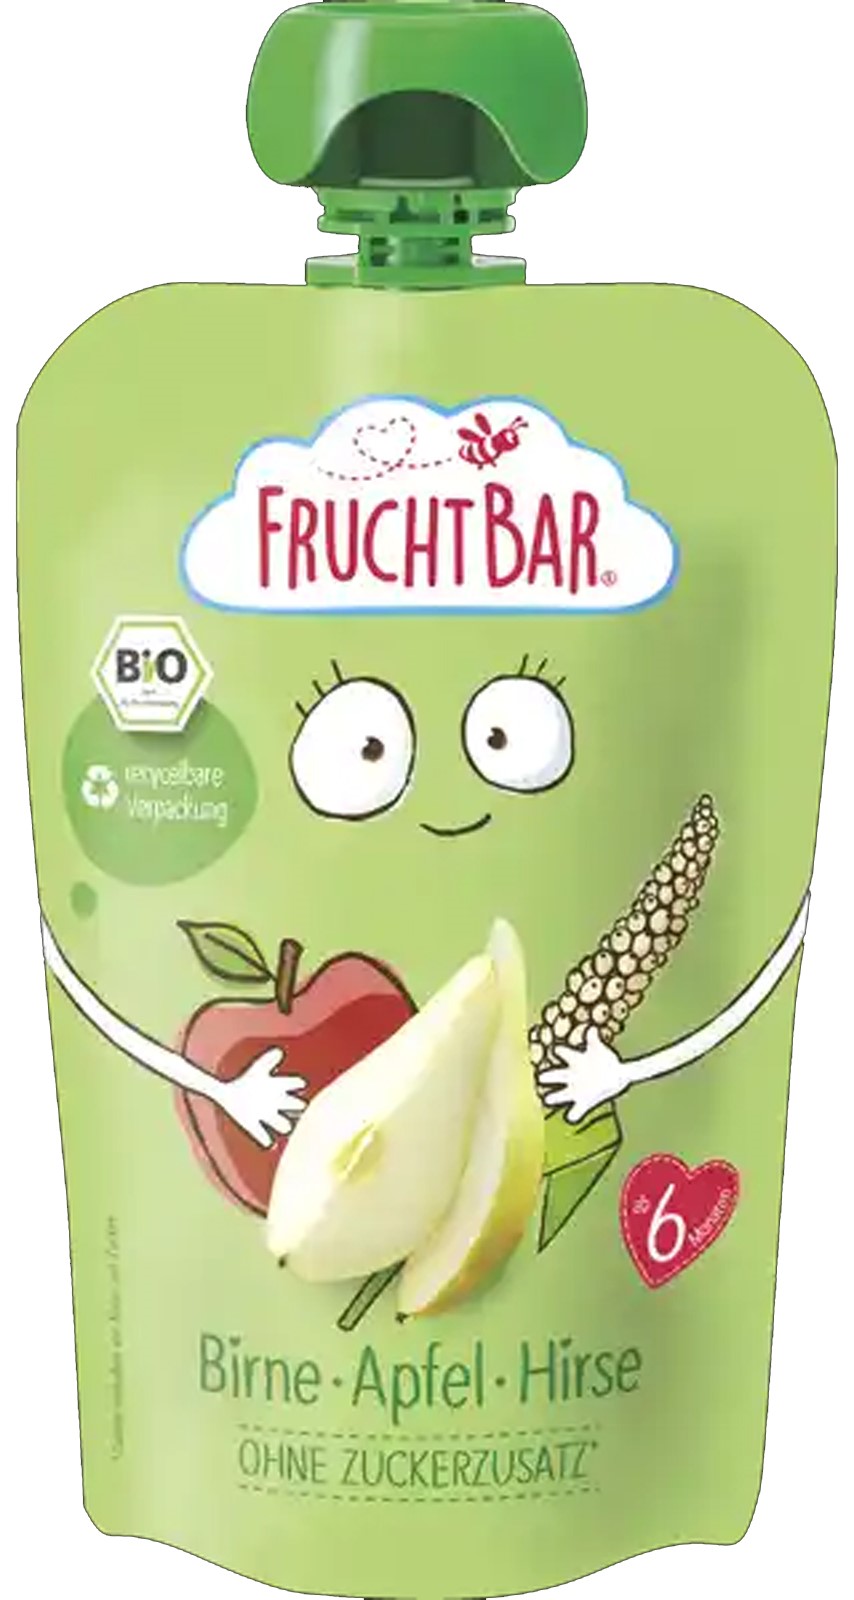 Fruchtbar Organic fruit puree with grain, pear, apple, millet